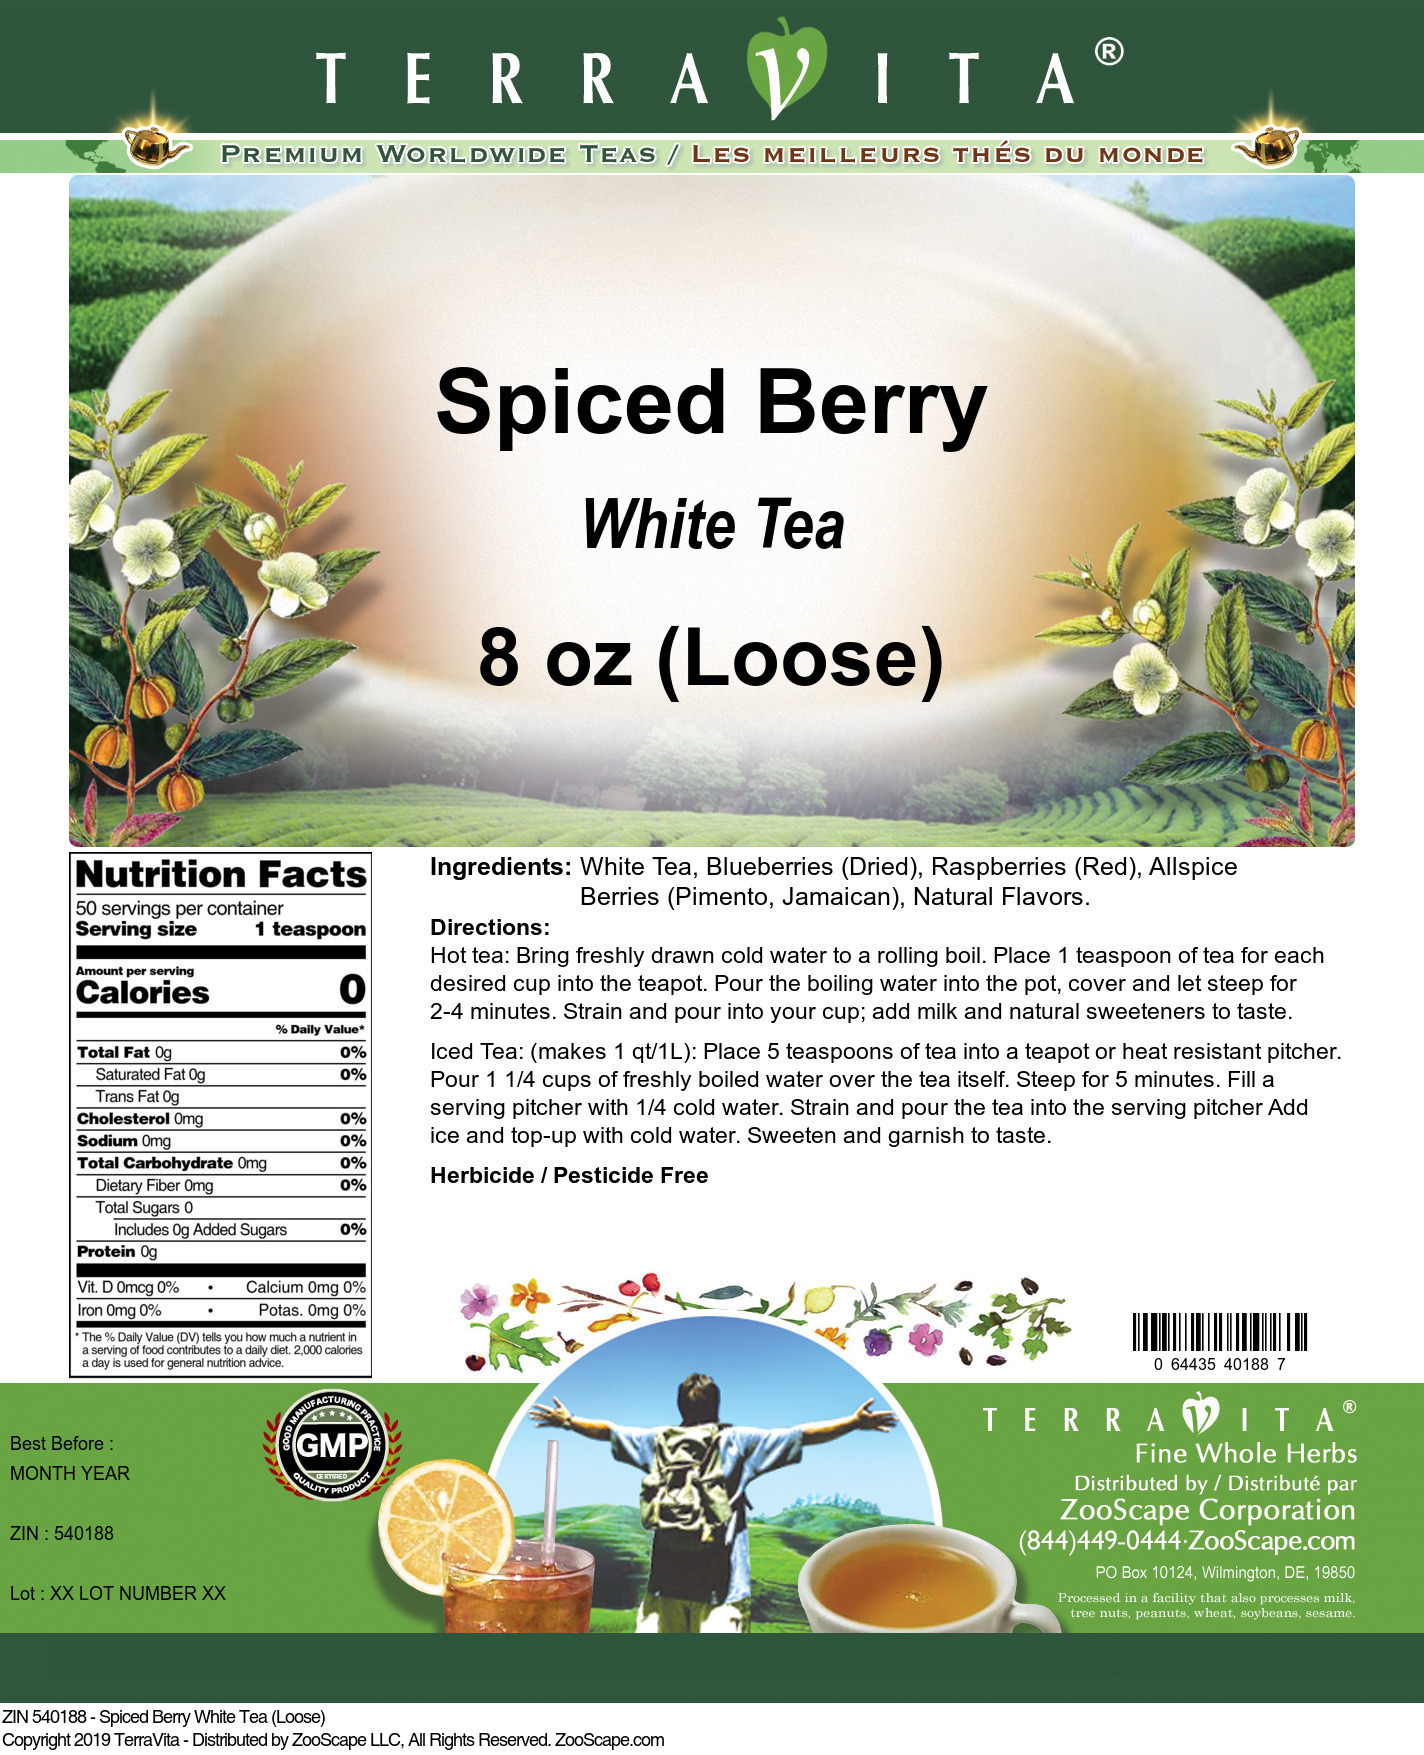 Spiced Berry White Tea (Loose) - Label